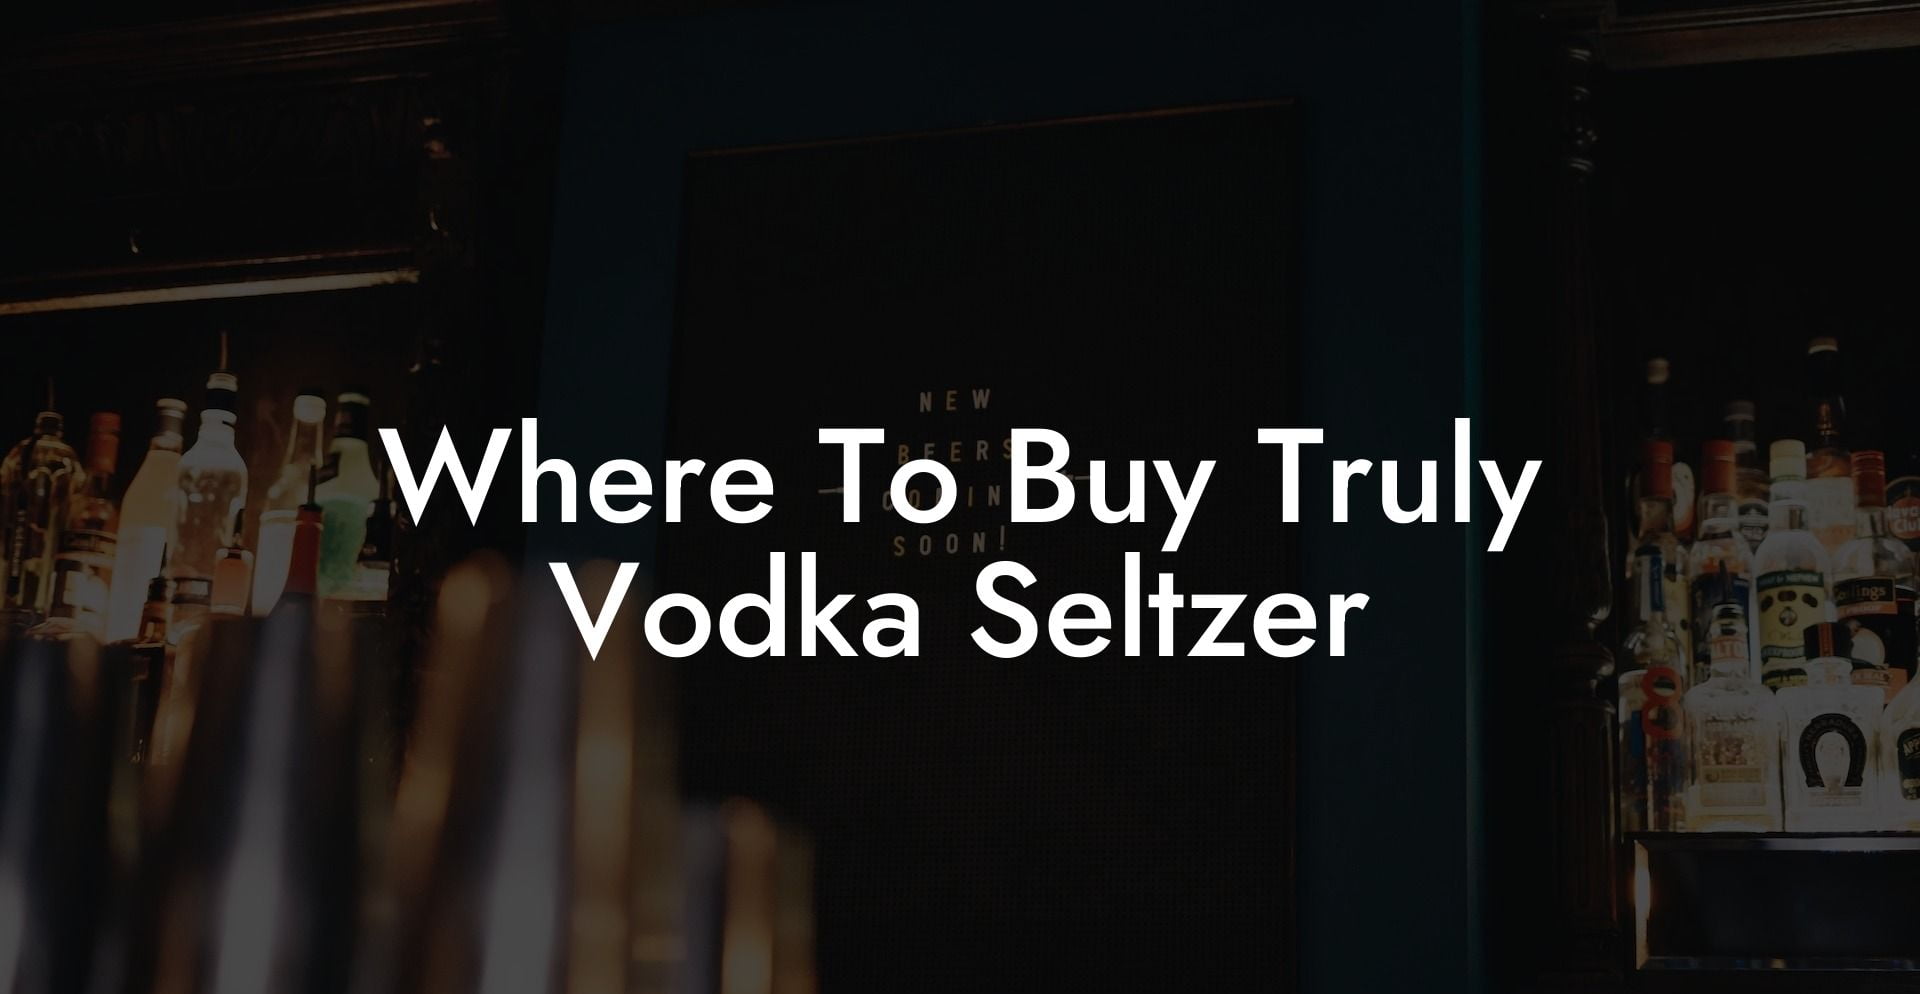 Where To Buy Truly Vodka Seltzer